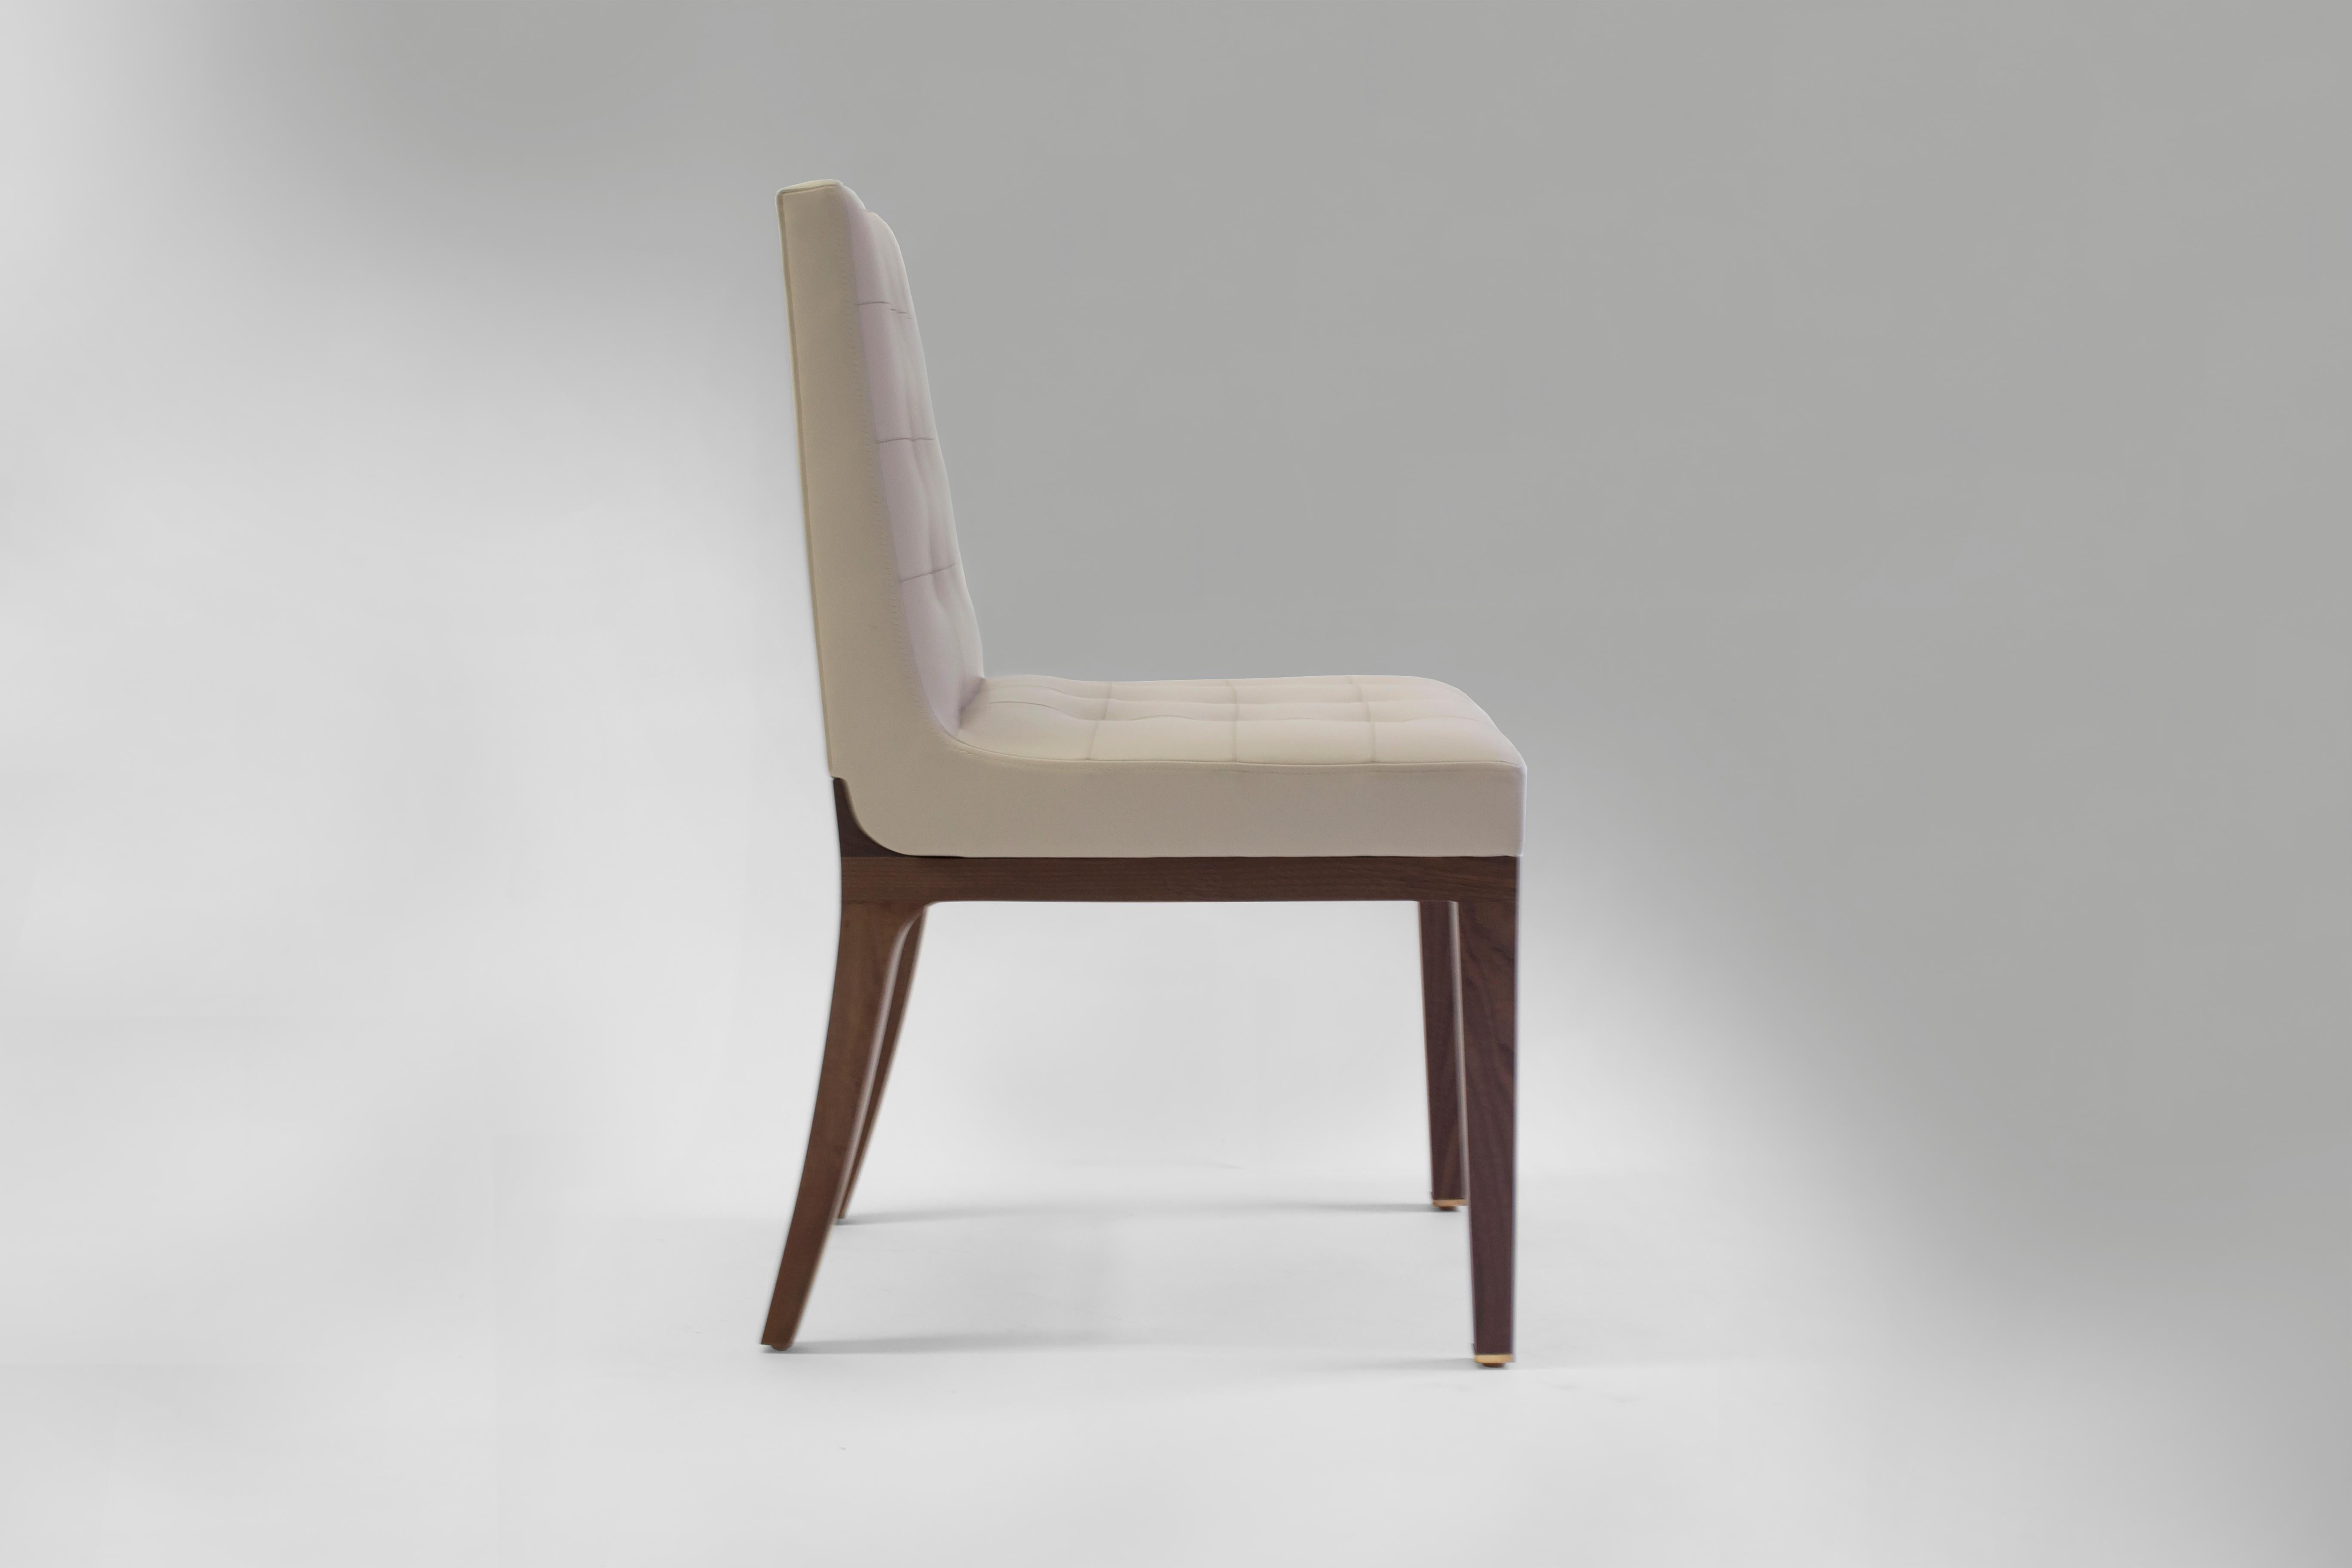 The Corbin side chair can be used as a dining chair, desk chair or an occasional chair, currently covered in tan leather with biscuit tufting on inside back with hand stitching in each tuft. Wood frame and legs made and finished in medium oak, also